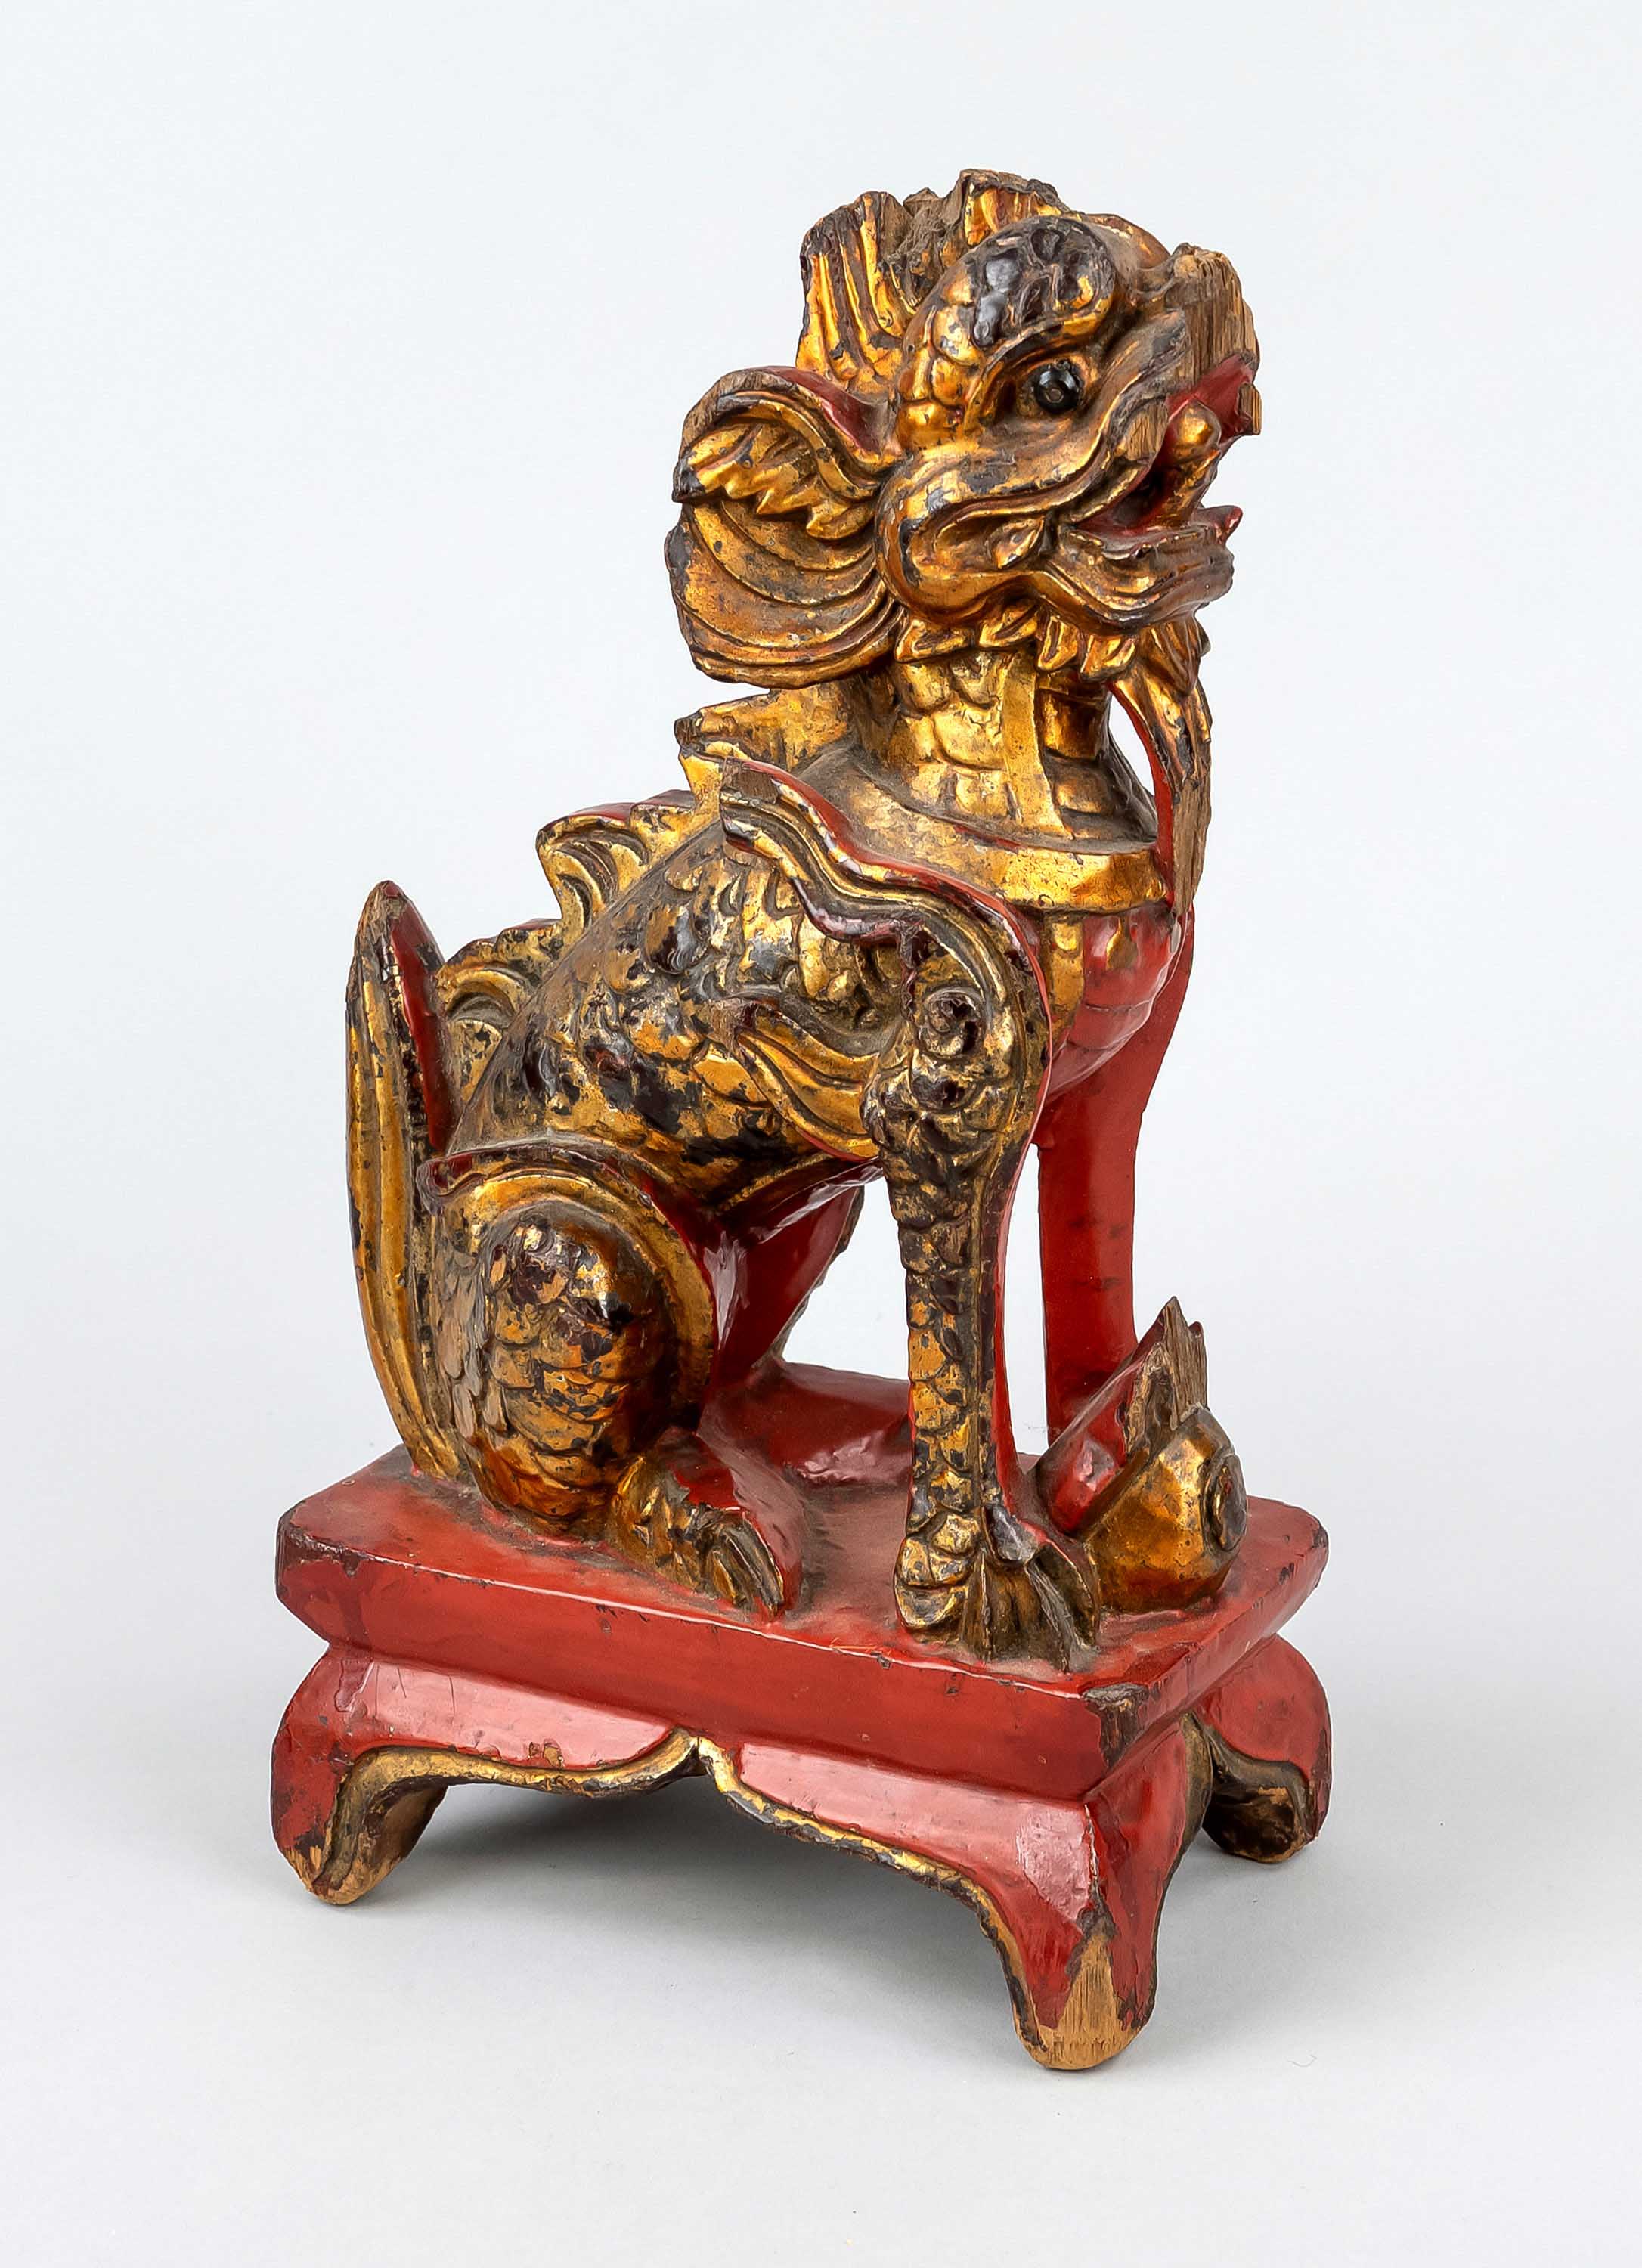 Wooden dragon, China, Qing dynasty(1644-1912), 19th century, wood carving with red and gold